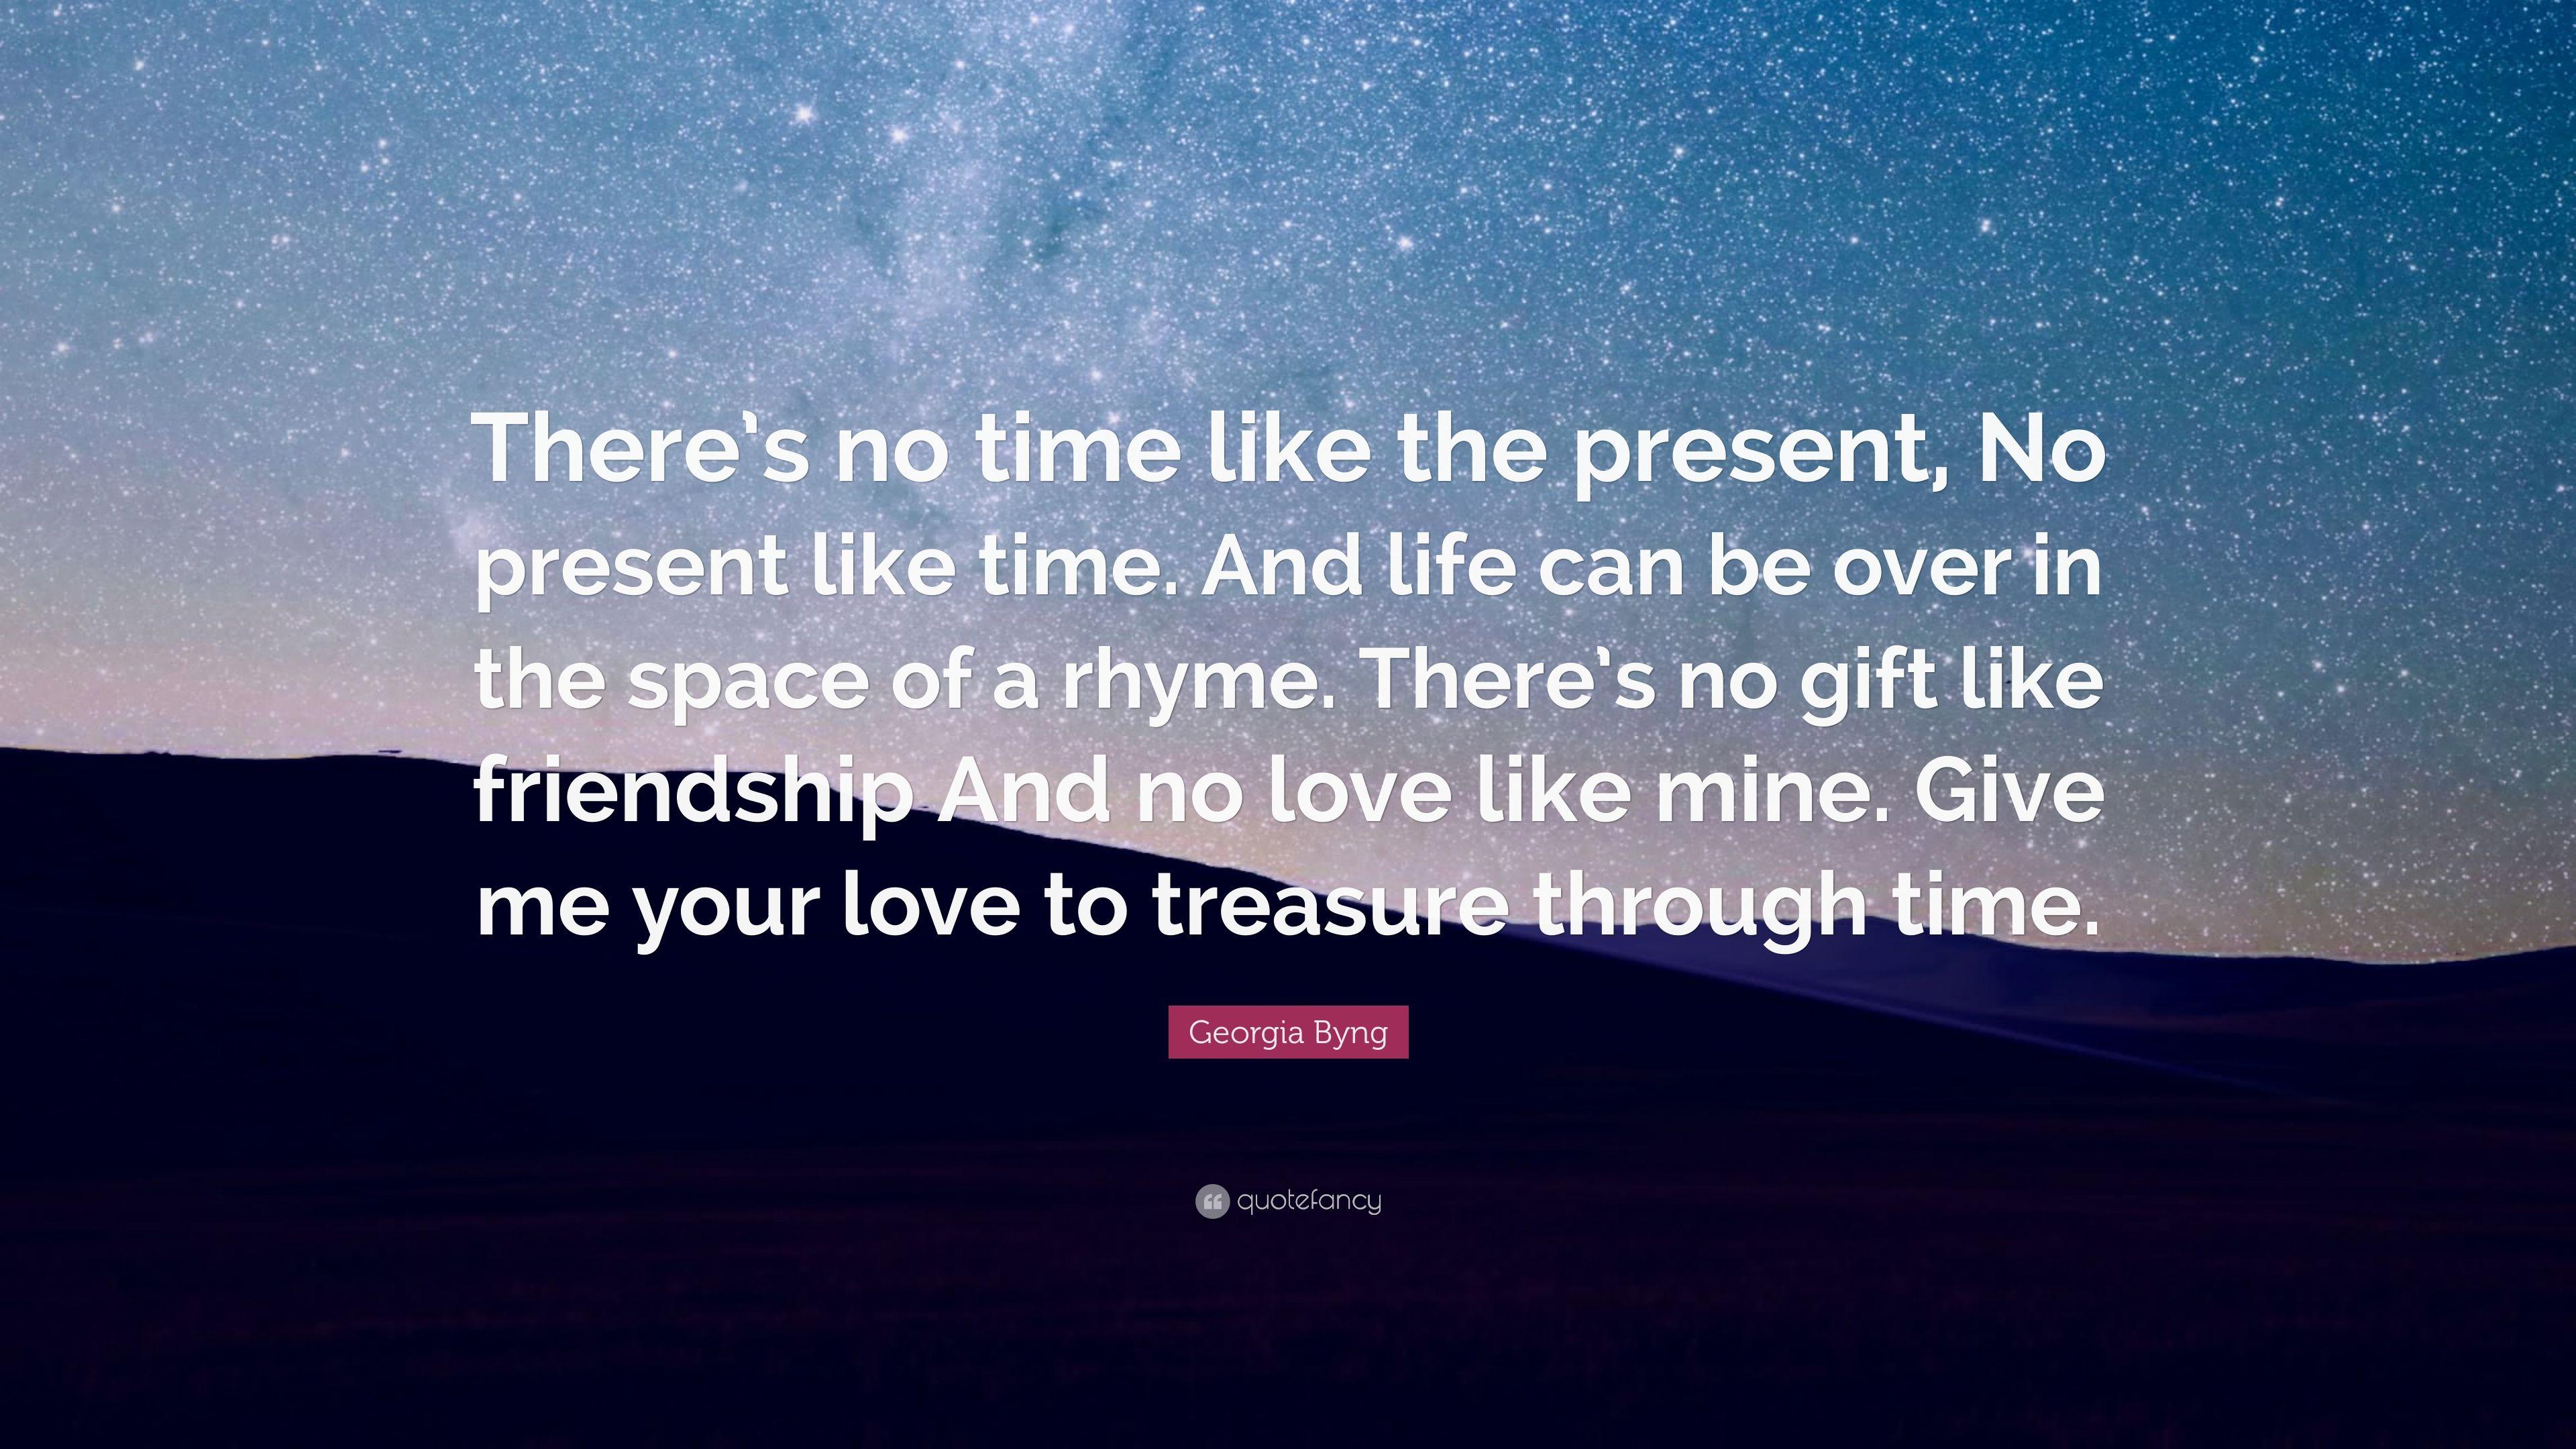 Georgia Byng Quote: “There's no time like the present, No present